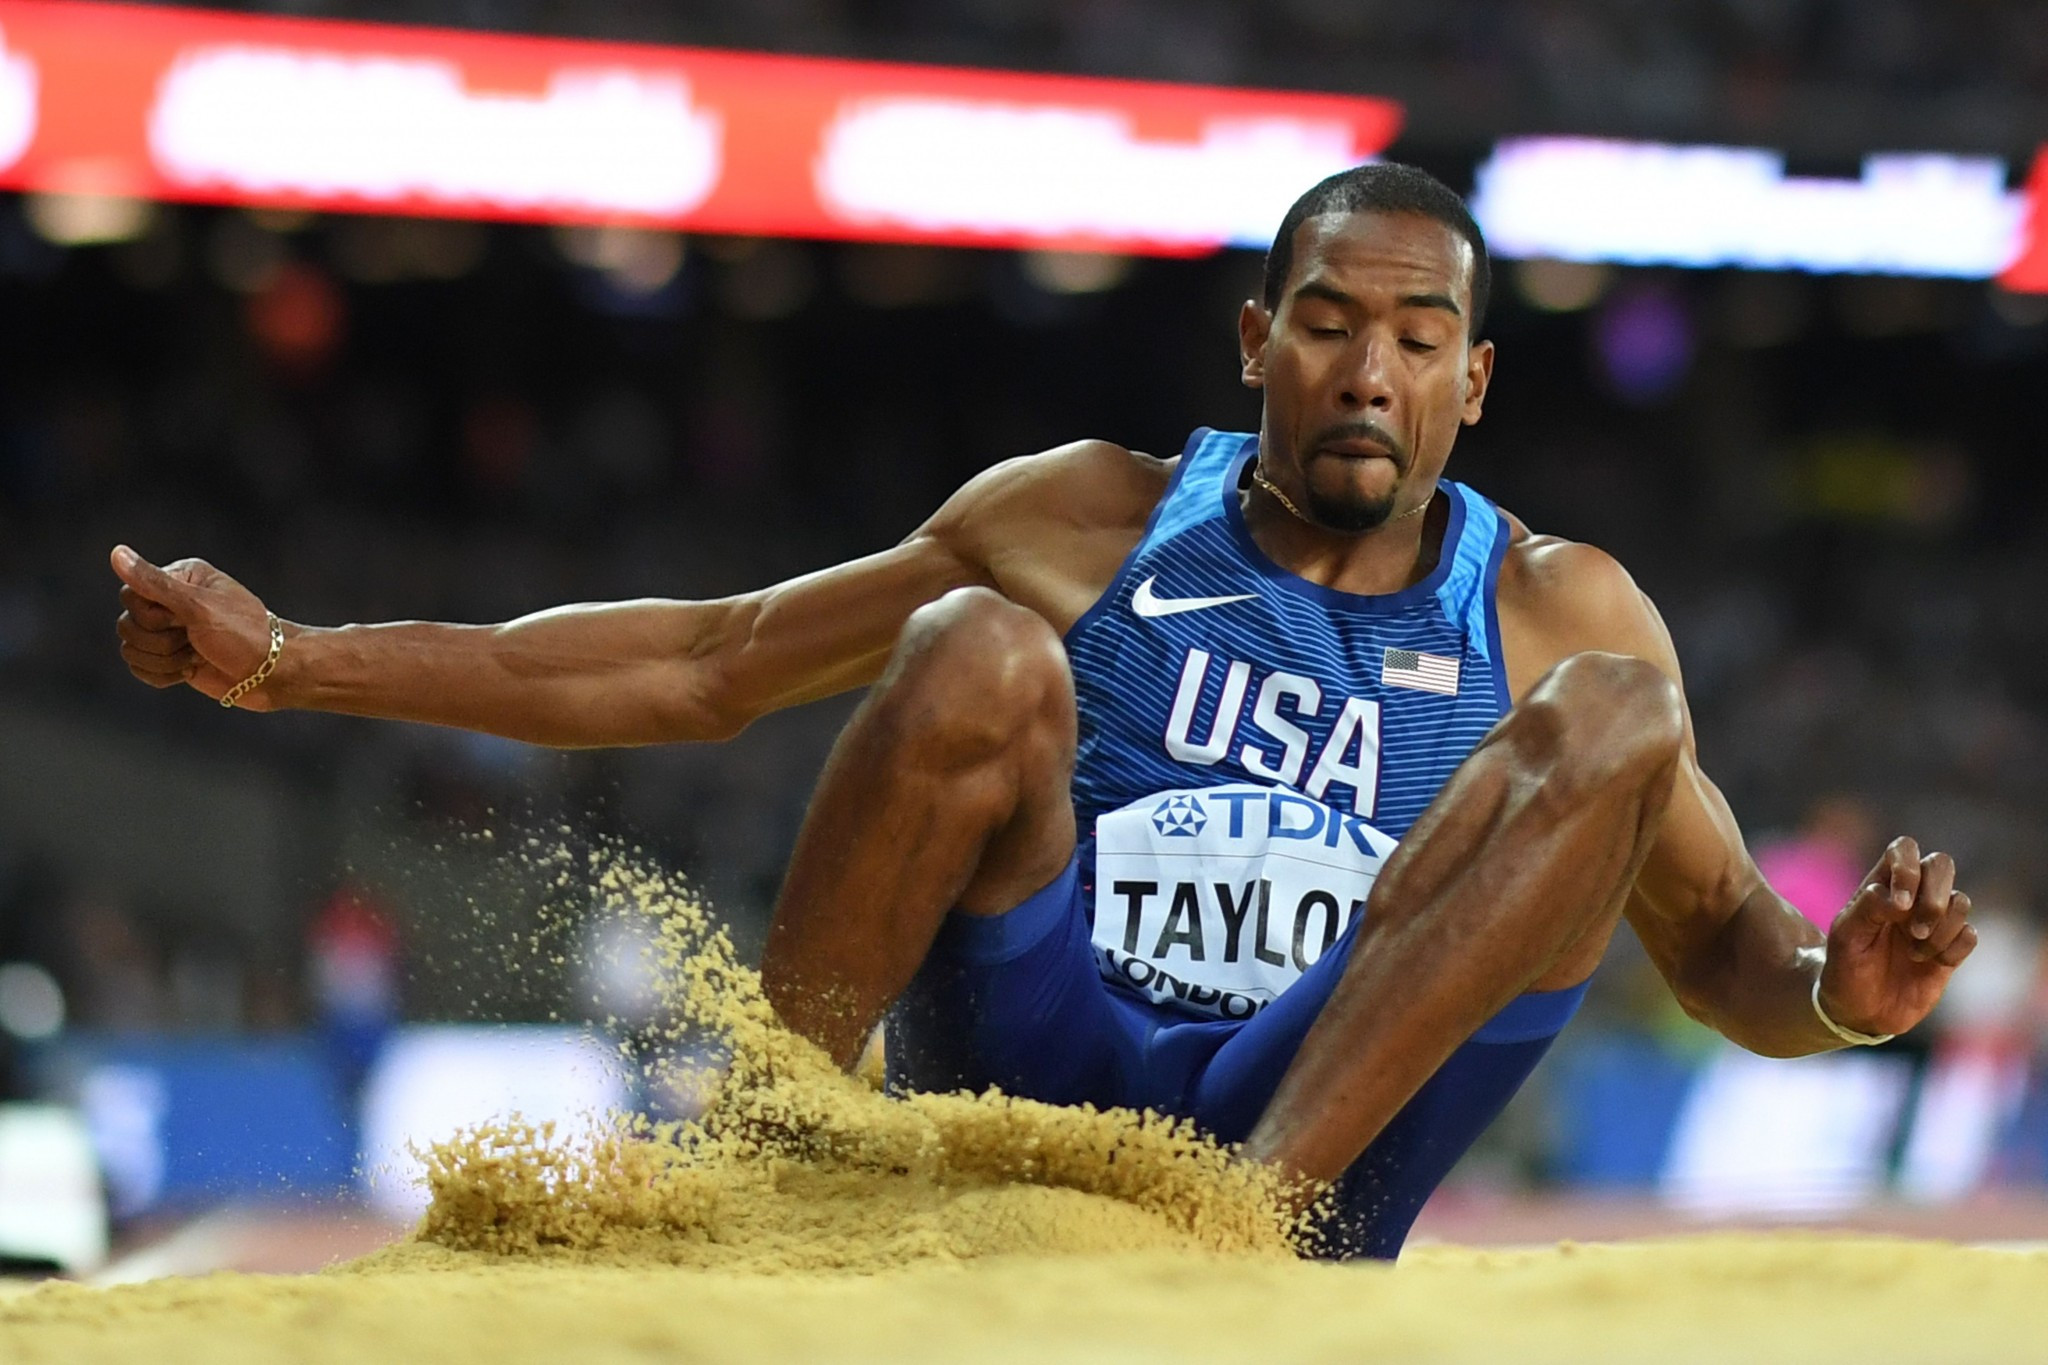 Christian Taylor won another major title in the triple jump ©Getty Images